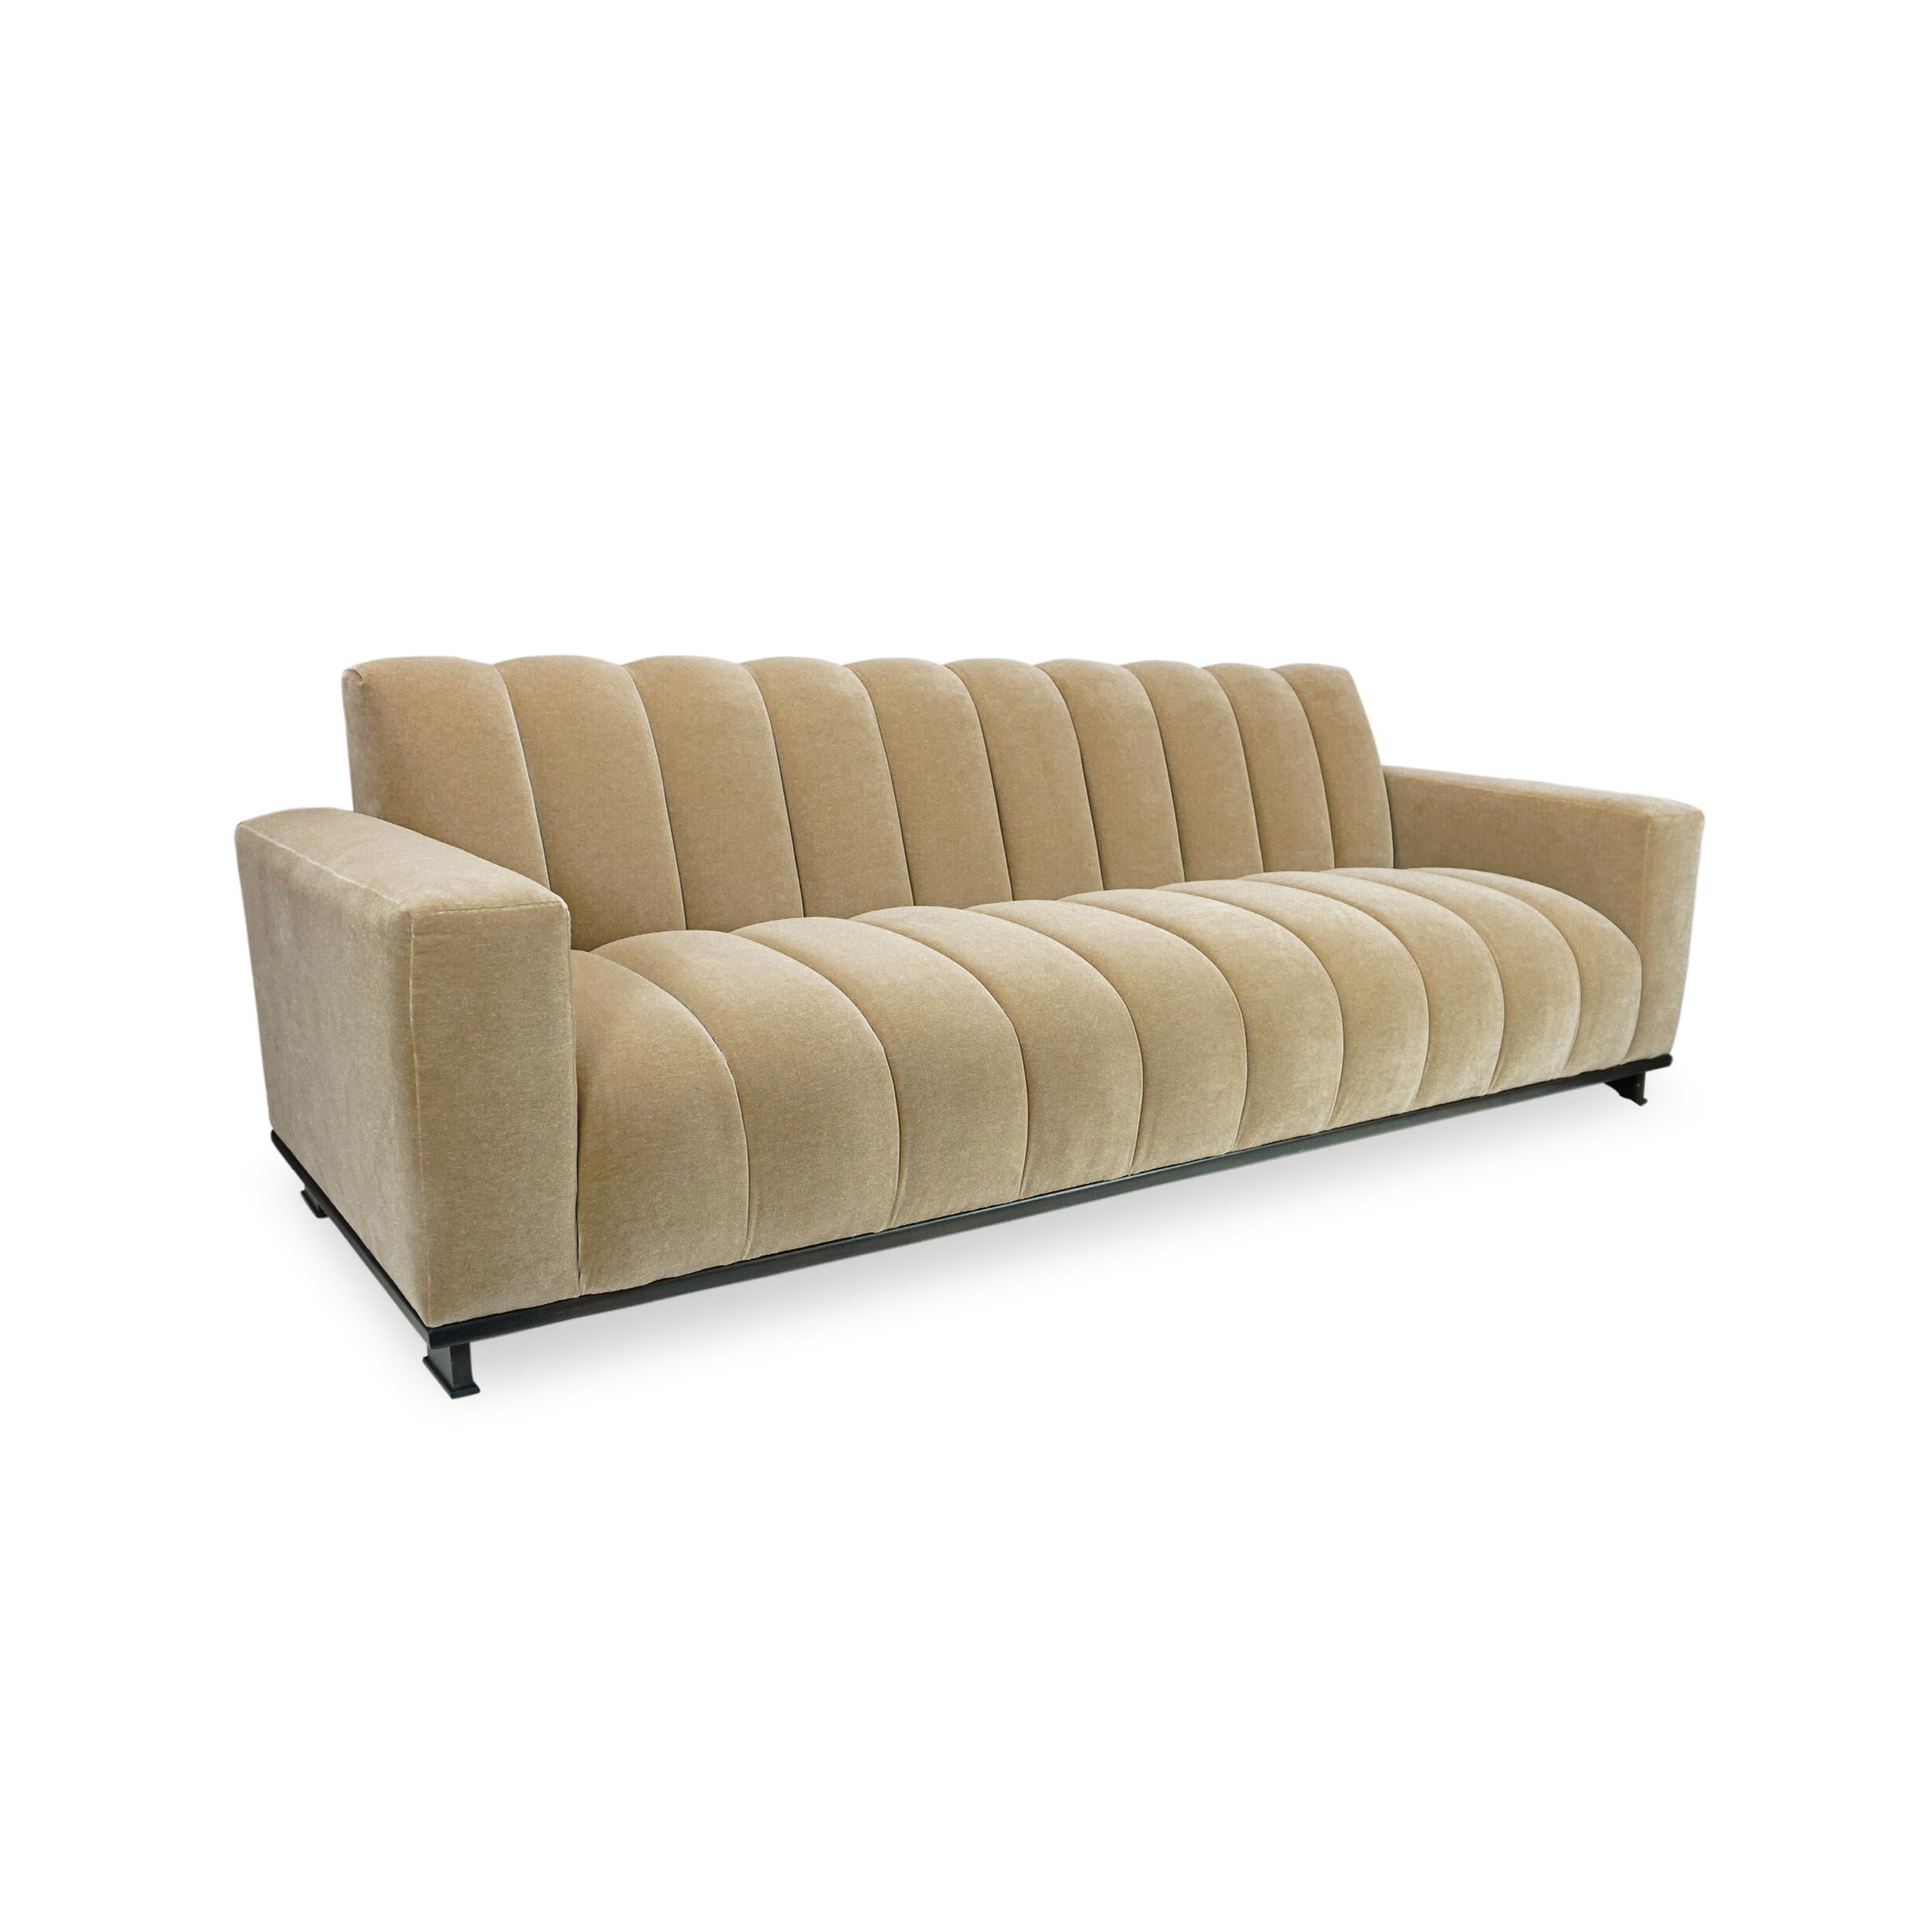 Lacquered Thick Channeled Biege Velvet Sofa For Sale